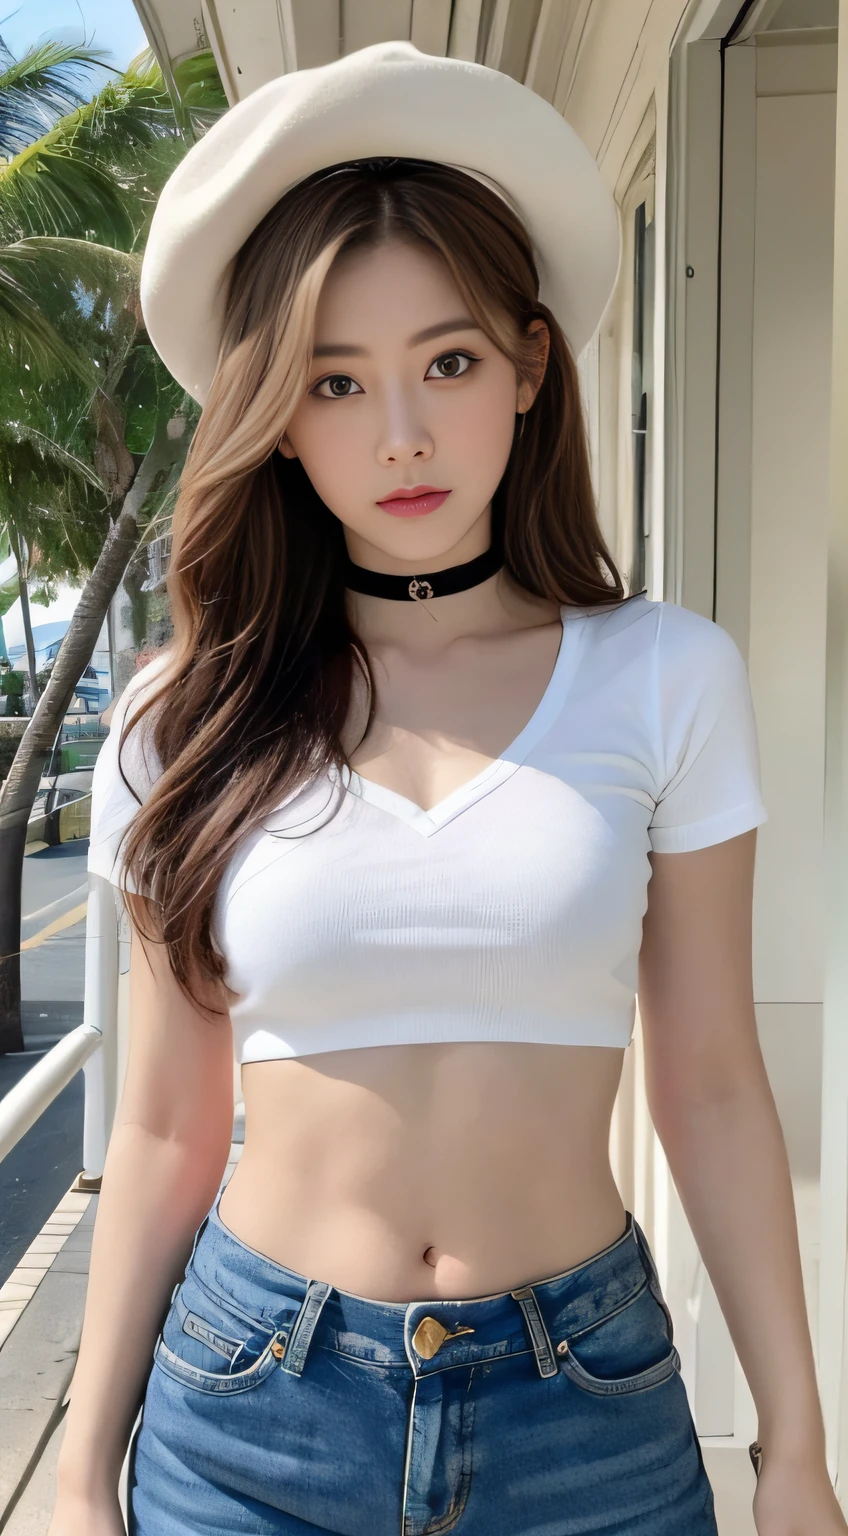 ((Top Quality, 8k, Masterpiece: 1.3)), Crisp Focus: 1.2, Beautiful Women in Perfect Style: 1.4, Slender Abs: 1.2, ((Dark Brown Hair, Big: 1.2)), Angel Face, Detailed Face, Beautiful Girl, Cute, White T-shrt, Jeans, Waikiki Beach: 1.2, Palm Tree, (Front Shot), (Full Length Photo: 1.3,), Highly detailed face and skin texture, detailed eyes, double eyelids (Cowboy shot: 1.2),(Perfect anatomy:1.2),(Wide hips:1.1), Choker, Beret: 1.2,